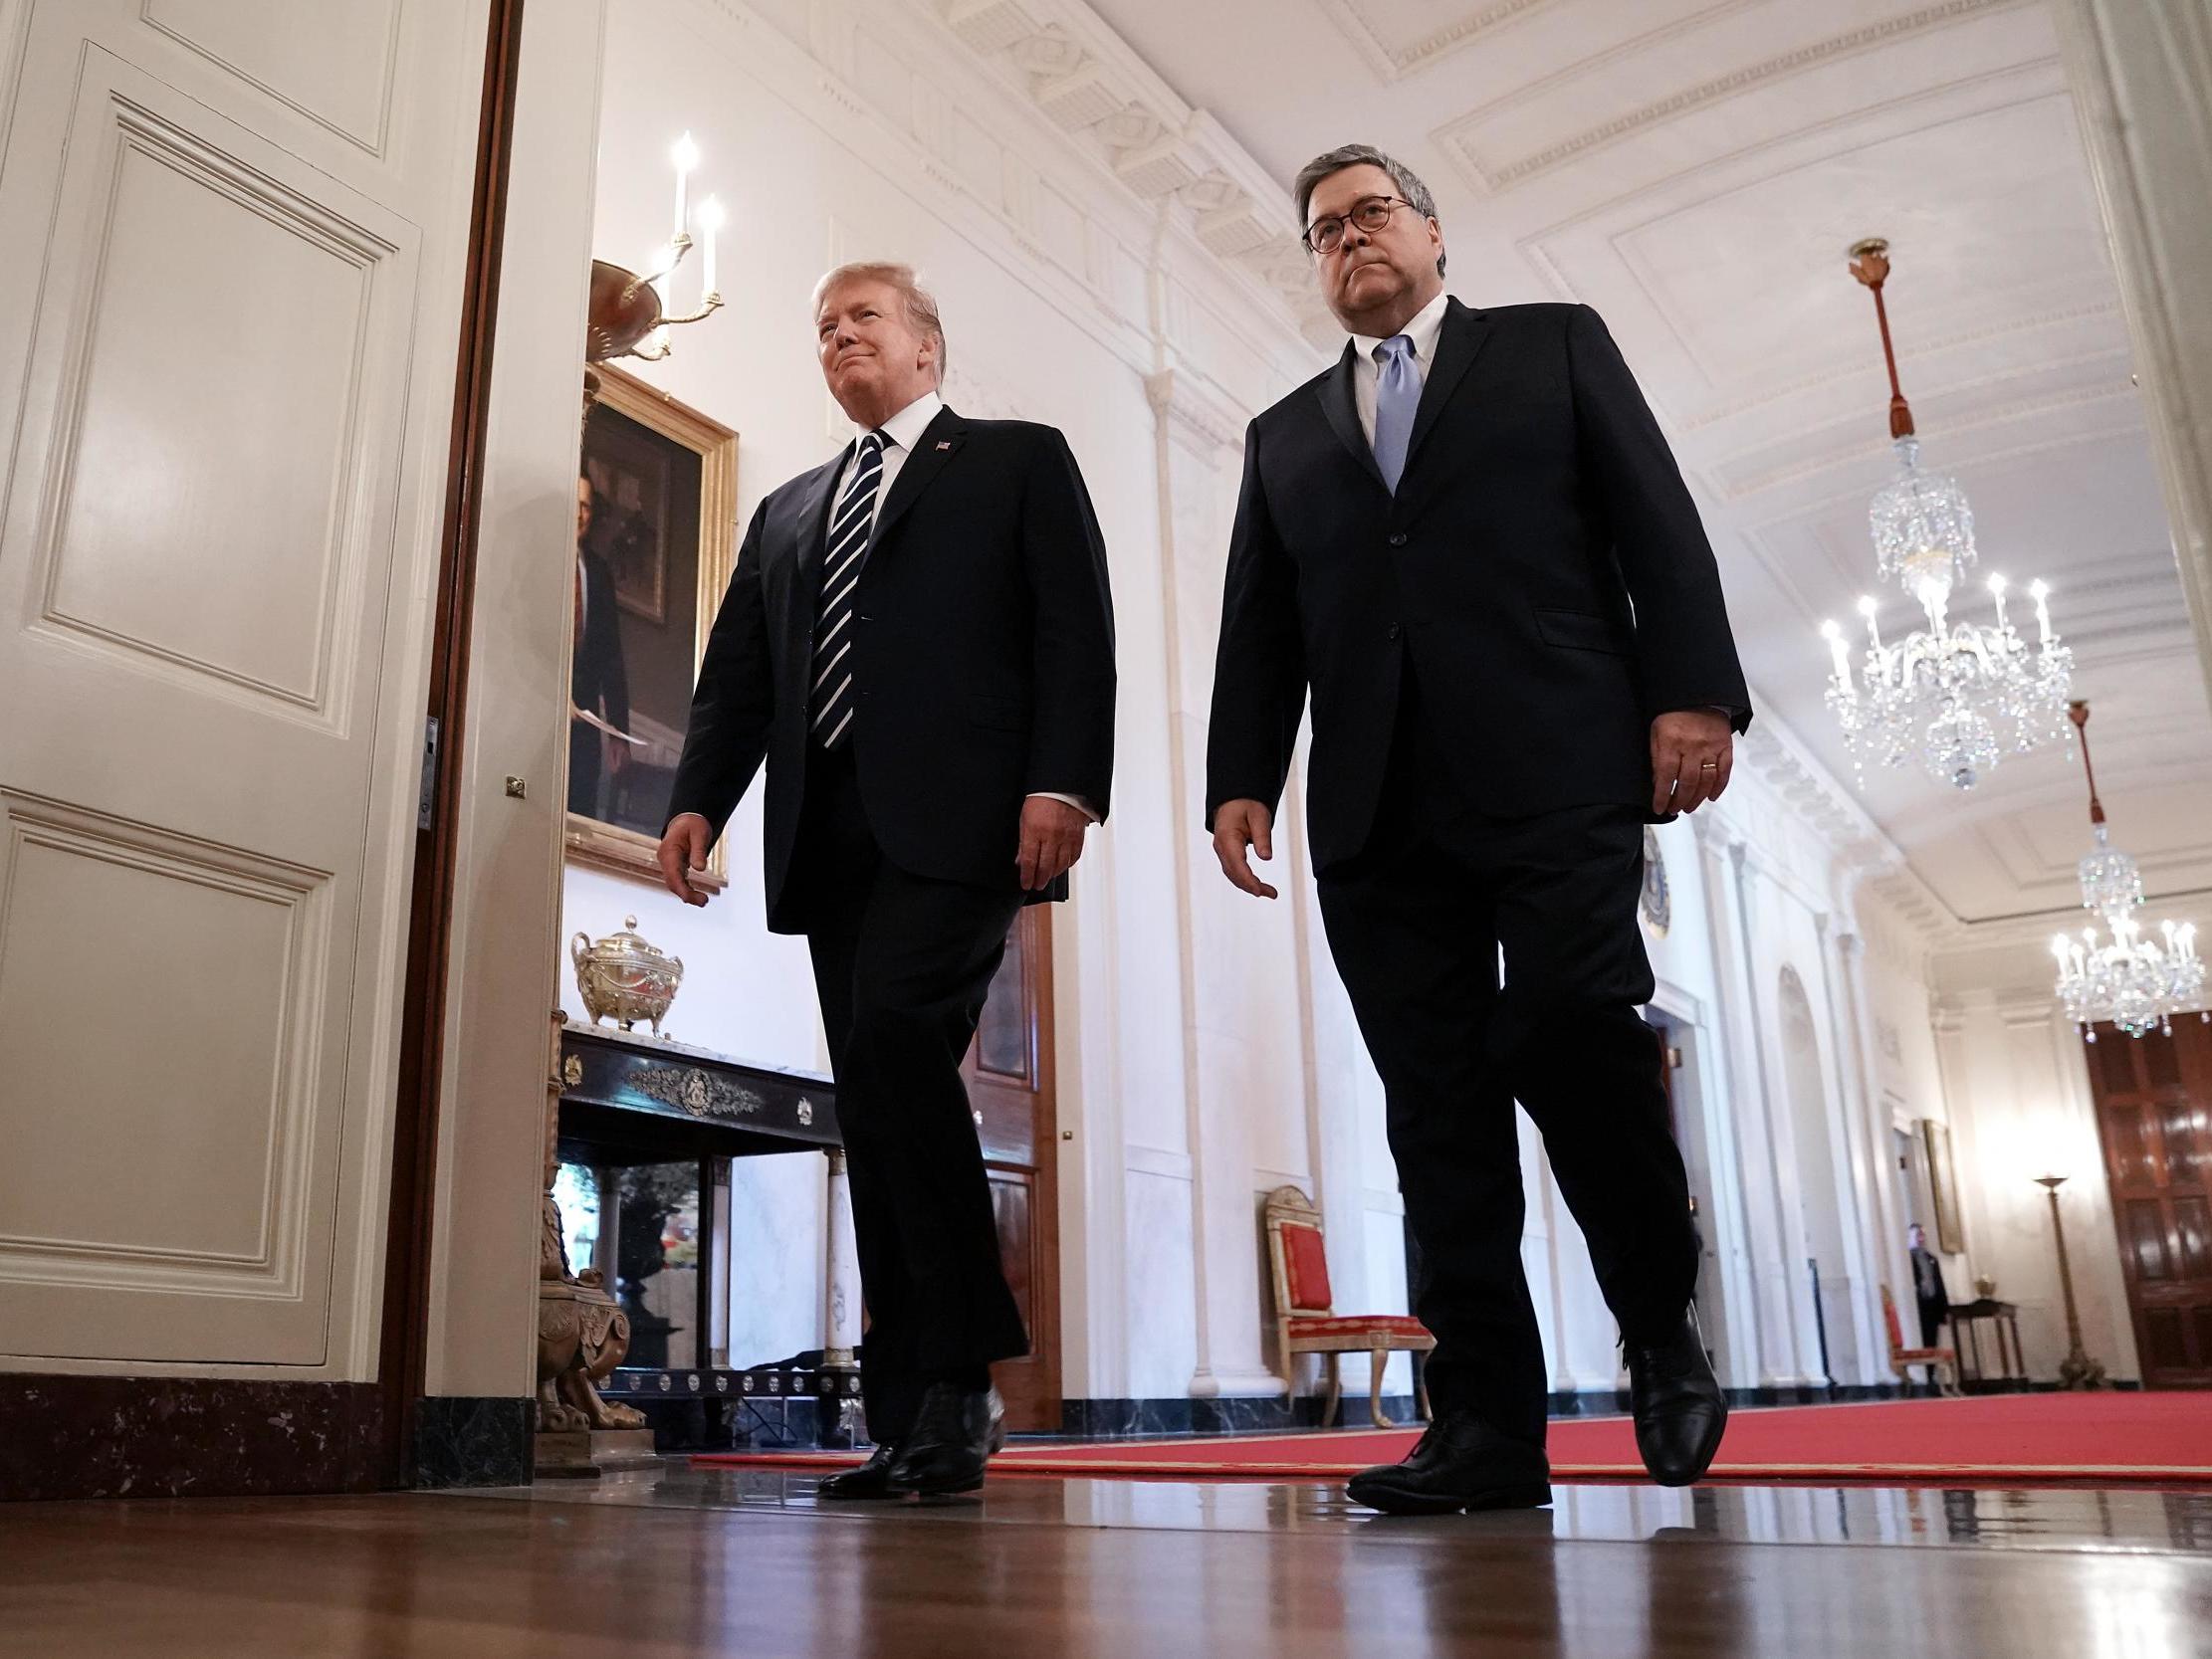 Donald Trump has given William Barr authority to declassify information related to investigations into presidential campaign